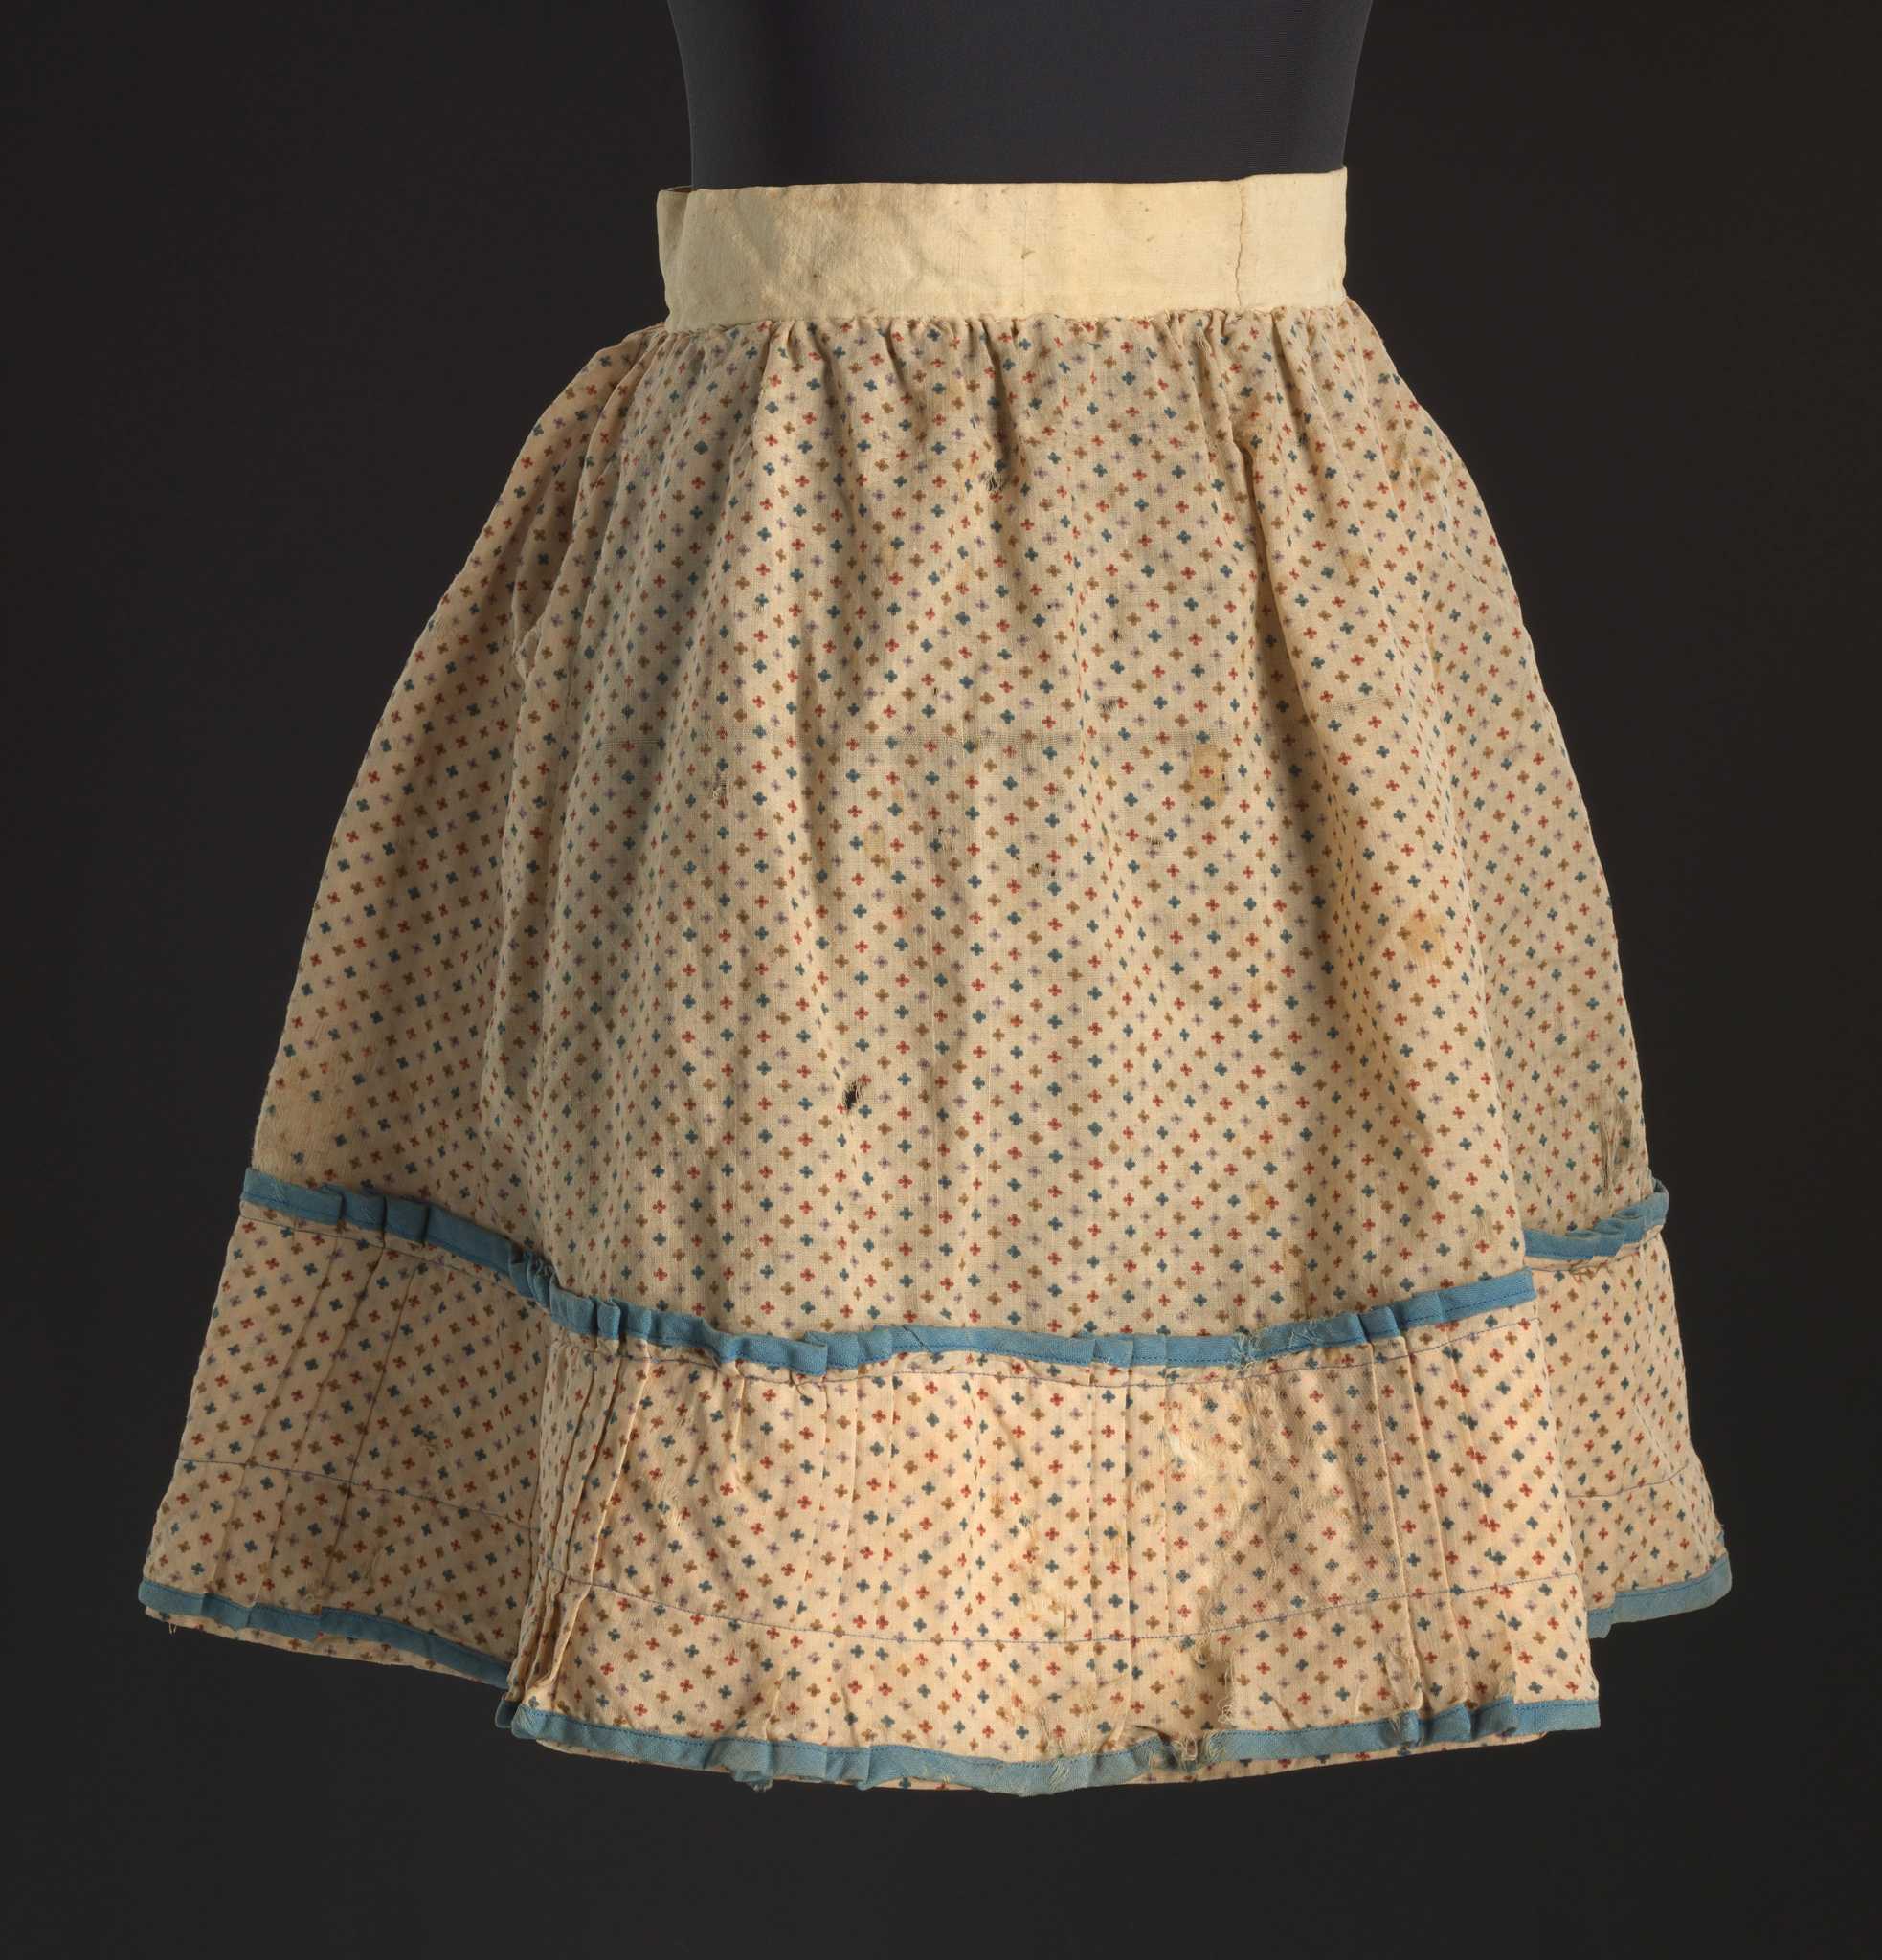 A child's circular skirt in a floral print with a pleated flounce on the hem. The main fabric is a plain weave natural fiber fabric with a cream ground and a repeating pattern of small four-petal flowers in red, purple, blue, and tan. The skirt is predominantly hand-sewn. It has a waistband made from an undyed bast fiber fabric with the floral print gathered and whip stitched to the waistband. The skirt is more closely gathered on the back. There is a slit at the center back that divides the waistband completely. There is no attached closure method, but rust staining at the back opening of the waistband suggests the skirt was pinned to close. The bottom of the skirt has an extra flounce of the floral print that has a series of pleats around the skirt in sets of three alternating with straight sections. This flounce is machine-sewn at the top and 1 1/2 inches from the bottom using blue thread that is possibly a synthetic fiber. The bottom and top edges of the flounce are bound with blue fabric sewn on the bias. The interior of the skirt is lined only behind the extra flounce with a hand-pinked undyed bast fiber fabric. There is a previous repair on the back proper right side of the skirt where a panel of light brown synthetic fabric is hand sewn on the interior of the skirt from the gathering at the waist to the top of the older linen lining on the bottom.